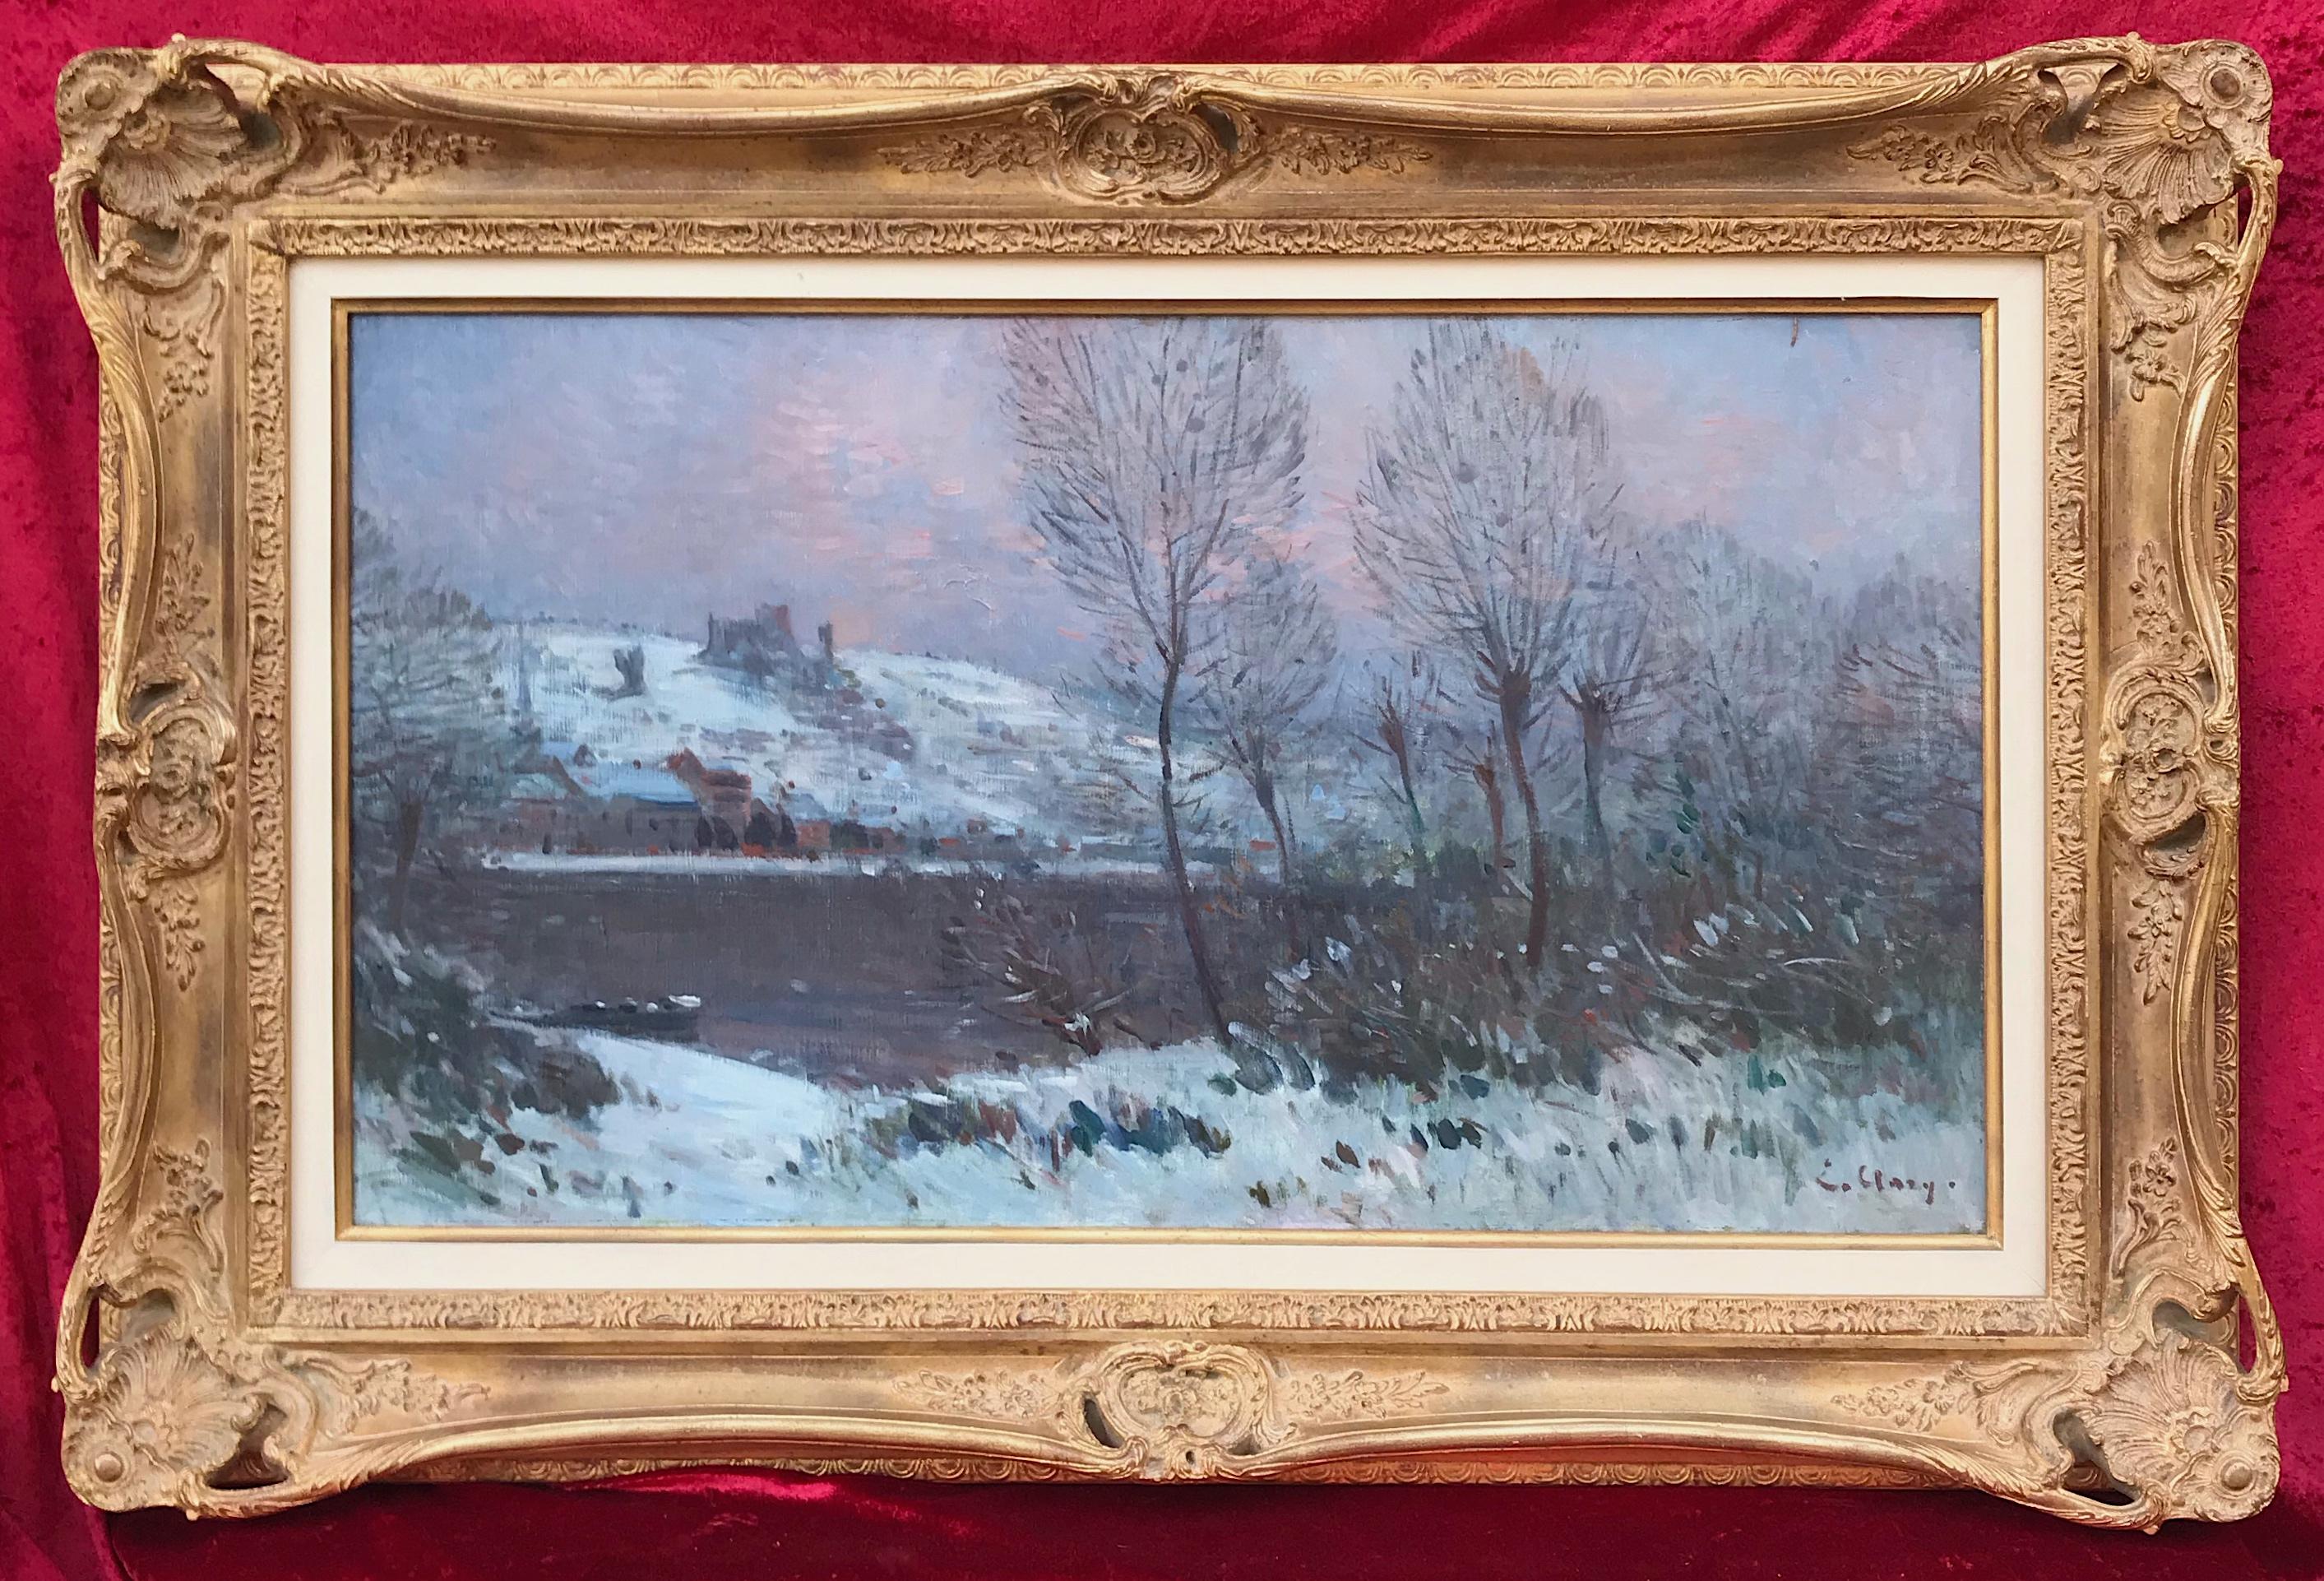 Jean Eugene Clary Landscape Painting - Winter Landscape by the River